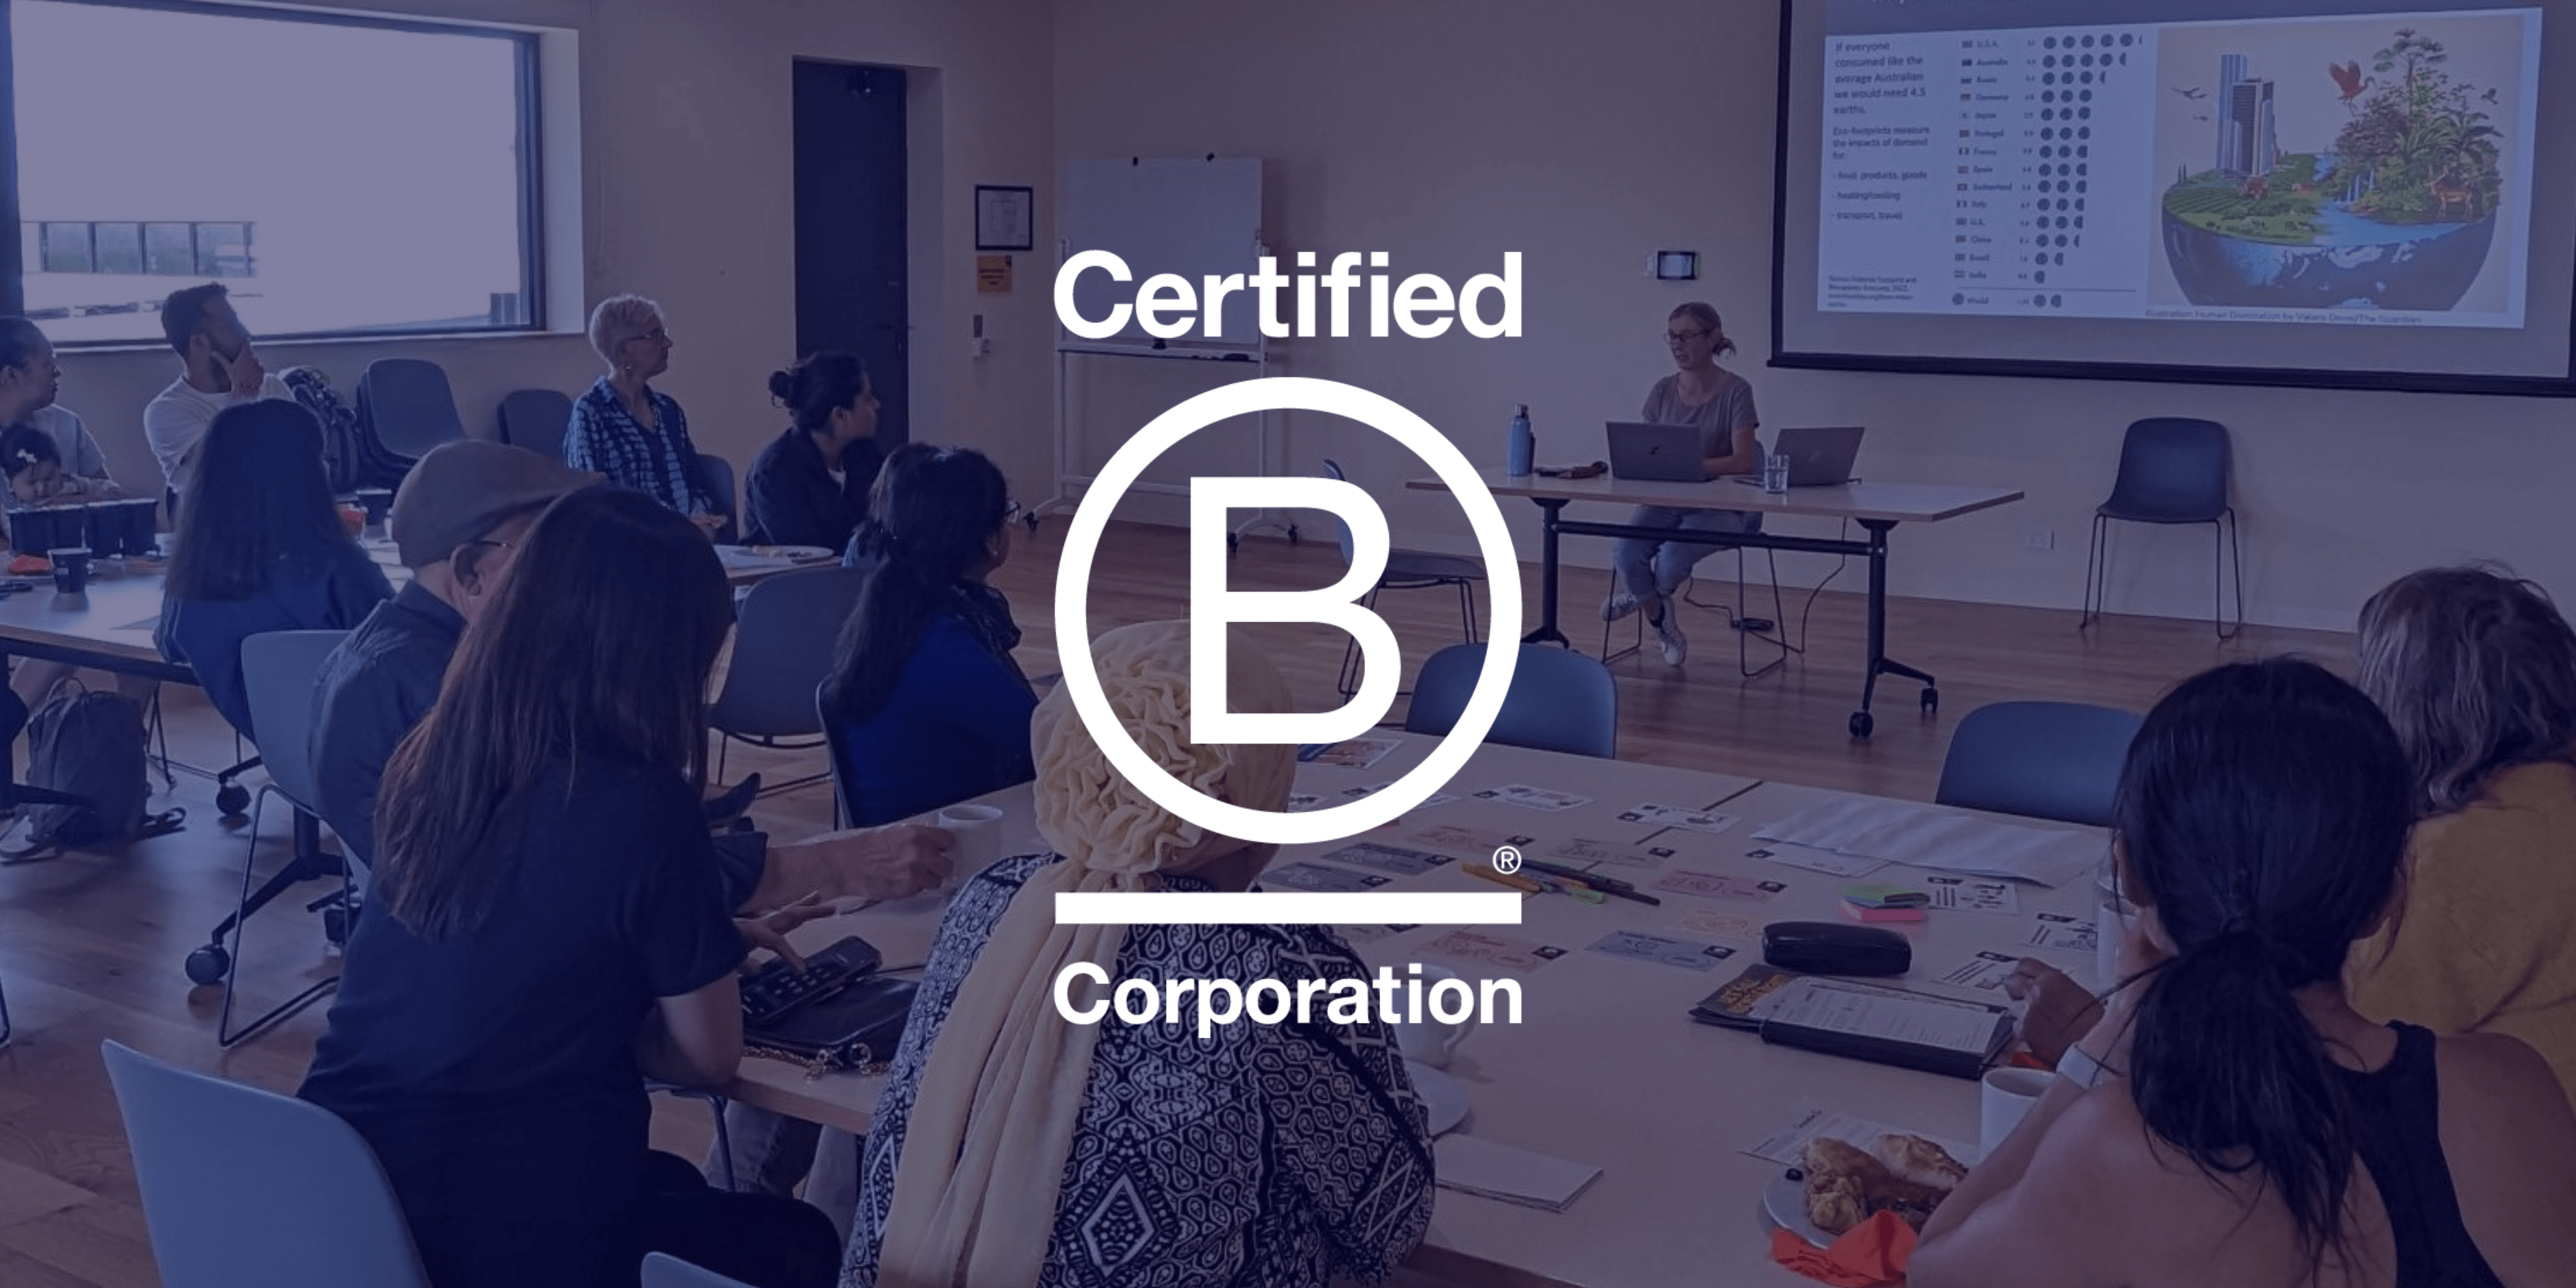 Why B Corp with Cindy Plowman